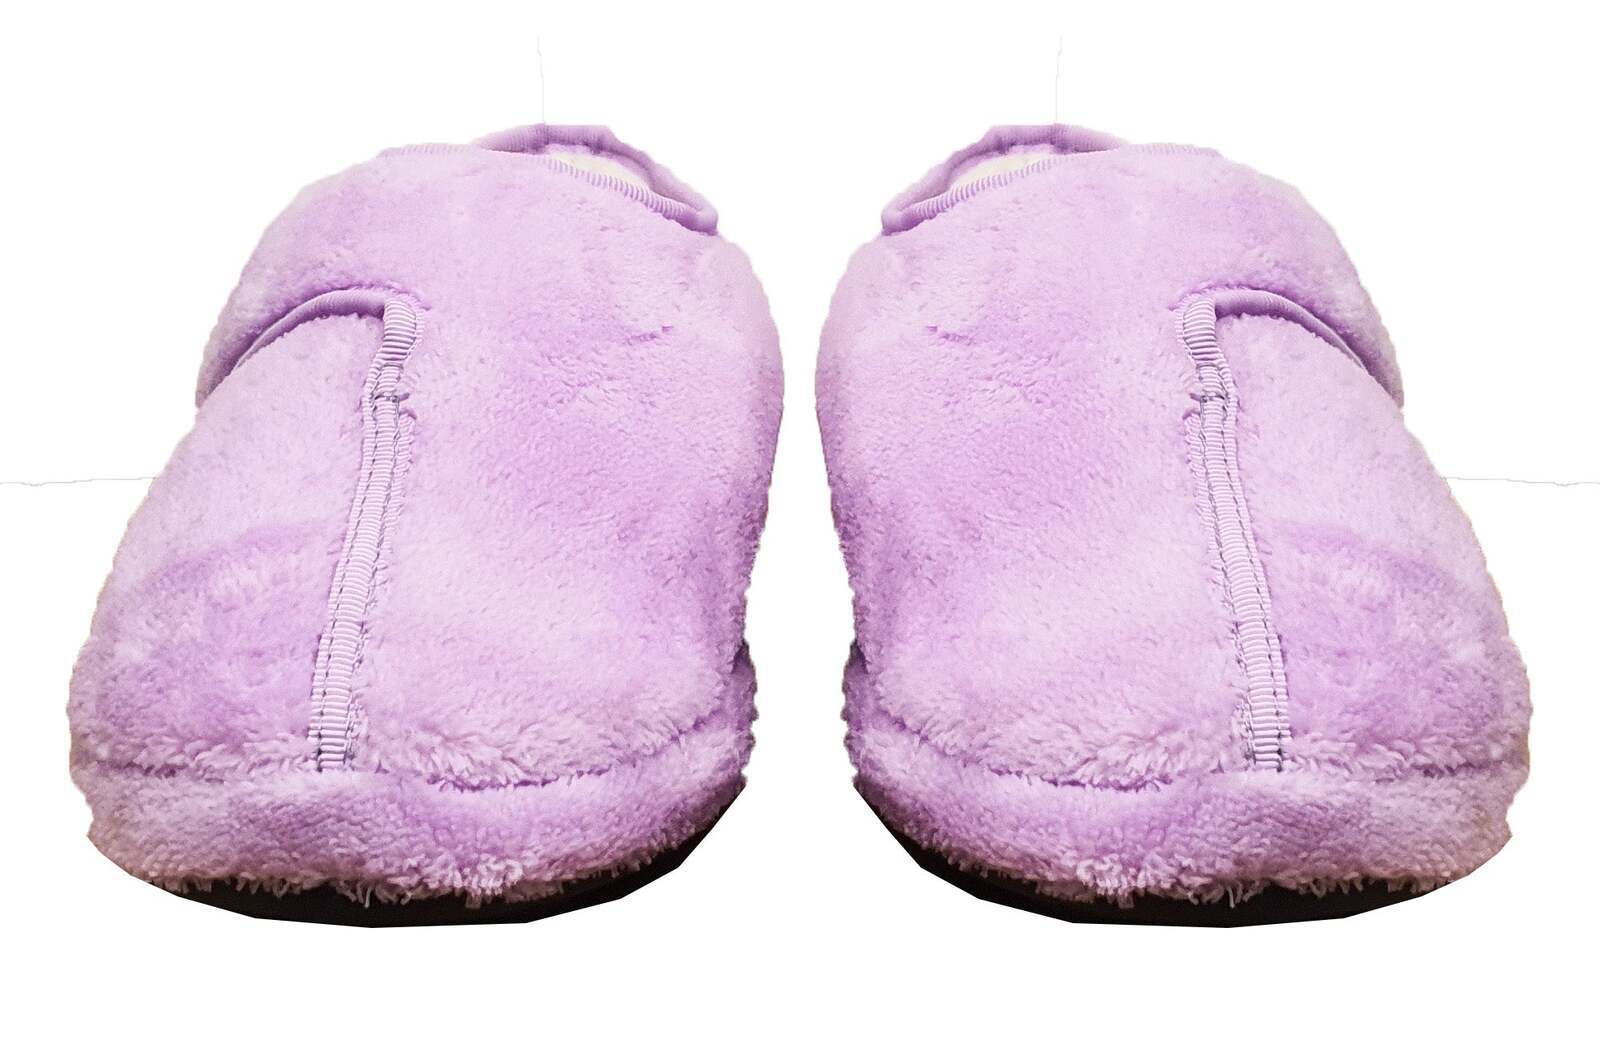 ARCHLINE Orthotic Plus Slippers Closed Scuffs Pain Relief Moccasins - Lilac - EU 41